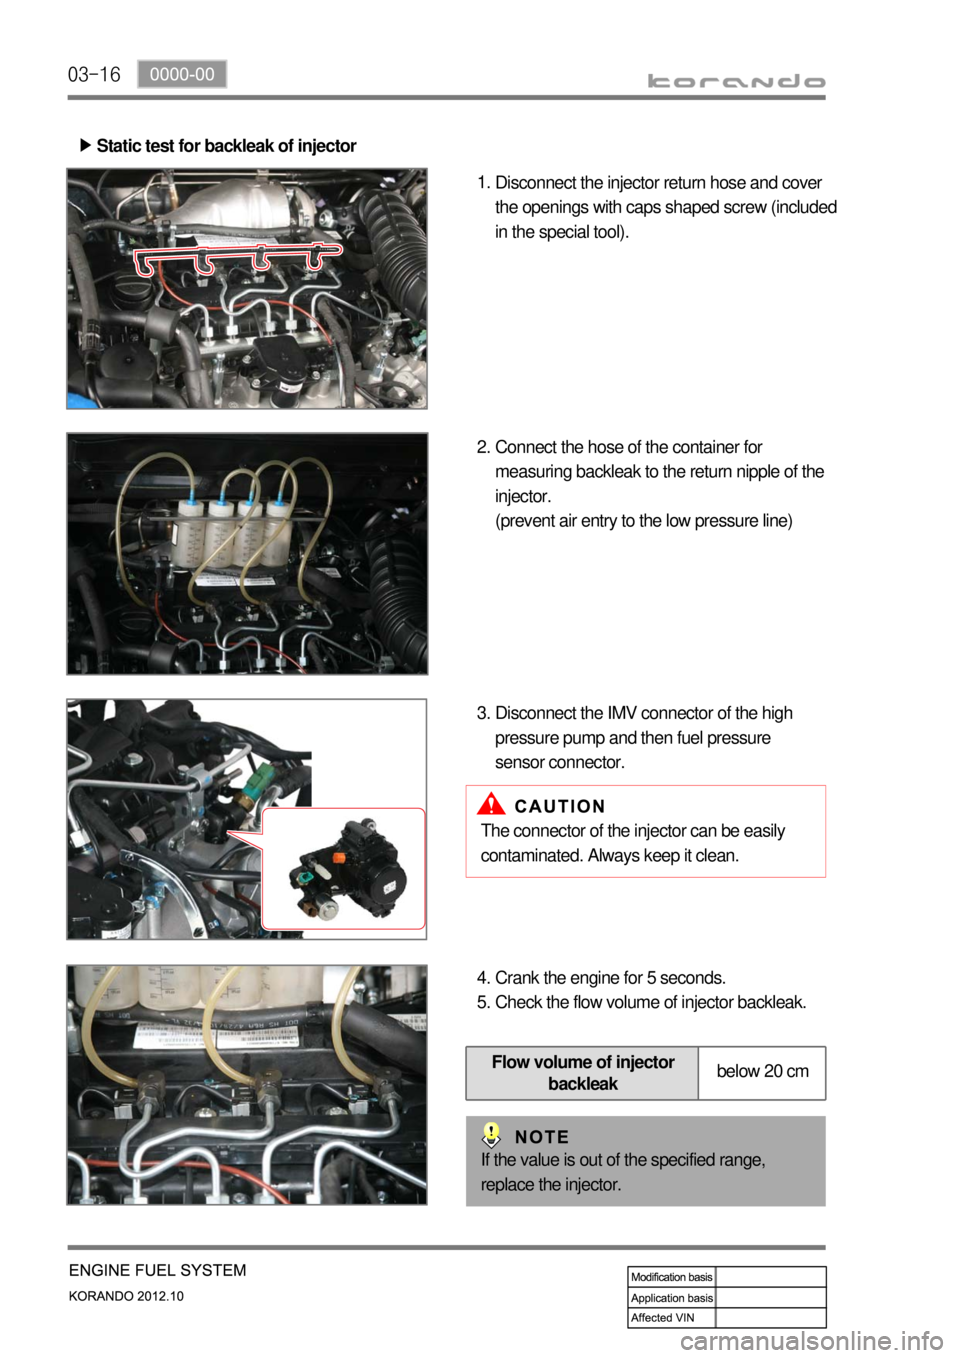 SSANGYONG KORANDO 2012  Service Manual 03-16
Static test for backleak of injector ▶
Disconnect the injector return hose and cover 
the openings with caps shaped screw (included 
in the special tool). 1.
Connect the hose of the container 